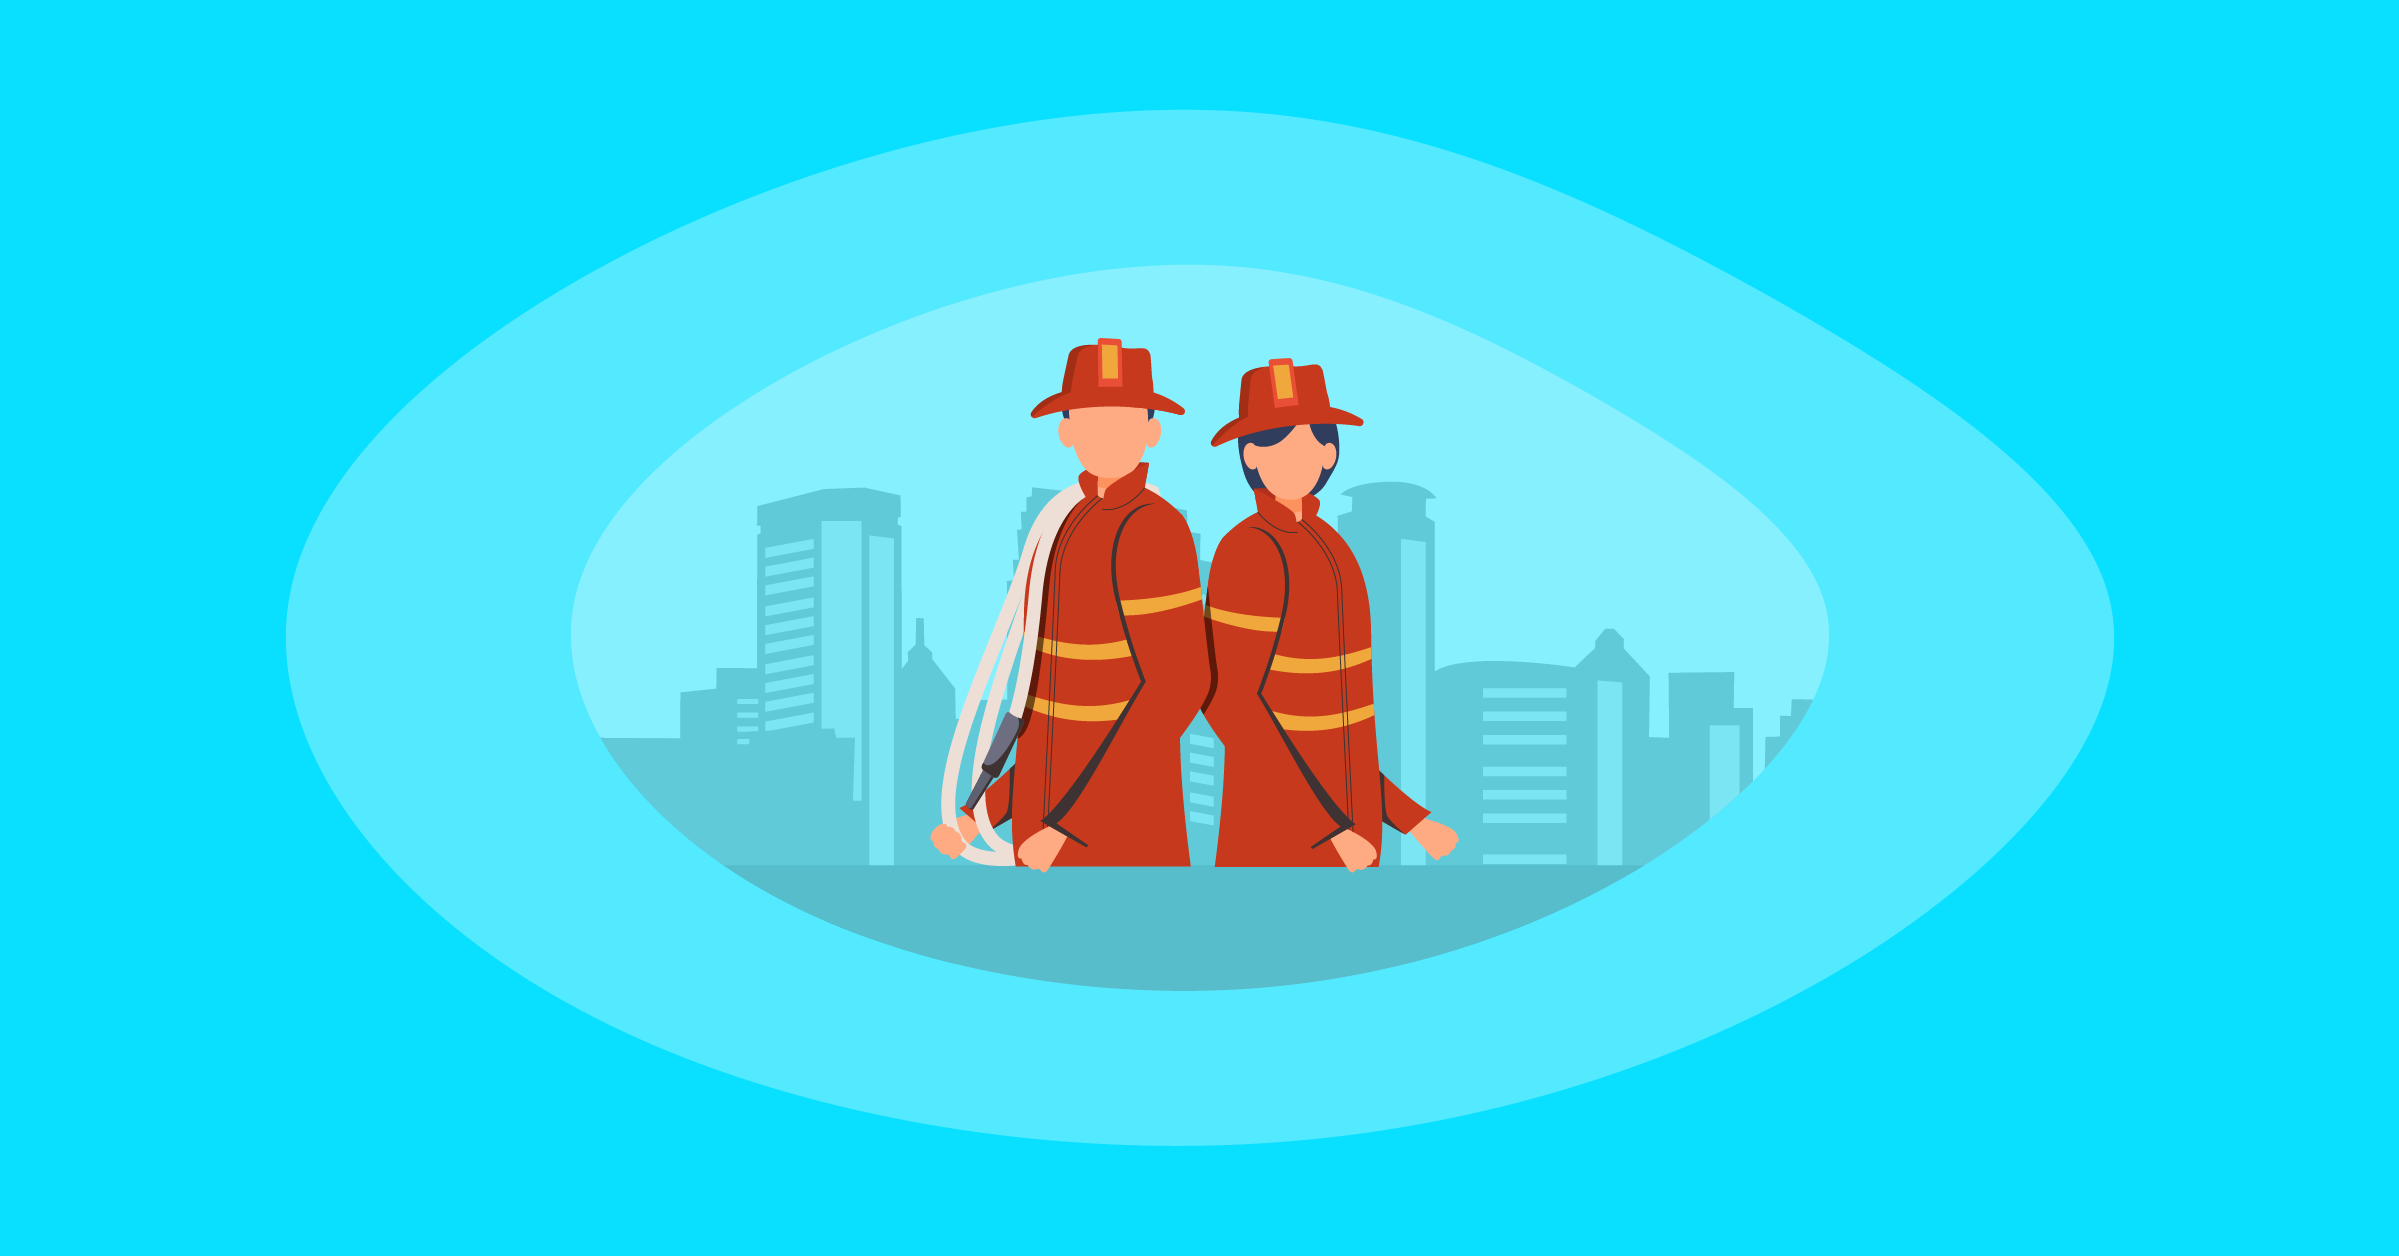 Illustration of firefighters